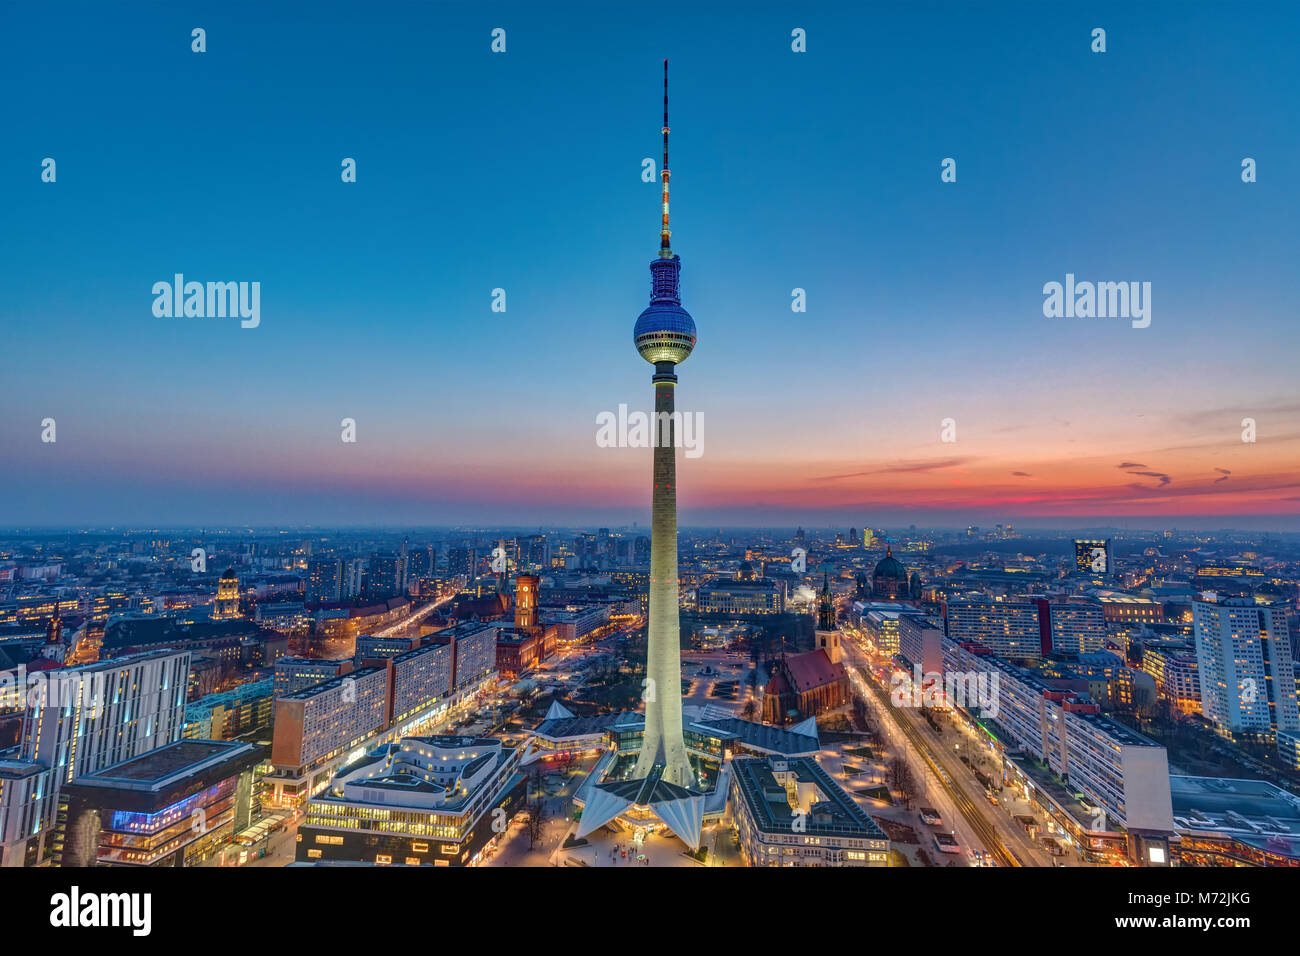 The Berlin skyline with the famous TV Tower after sunset Stock Photo